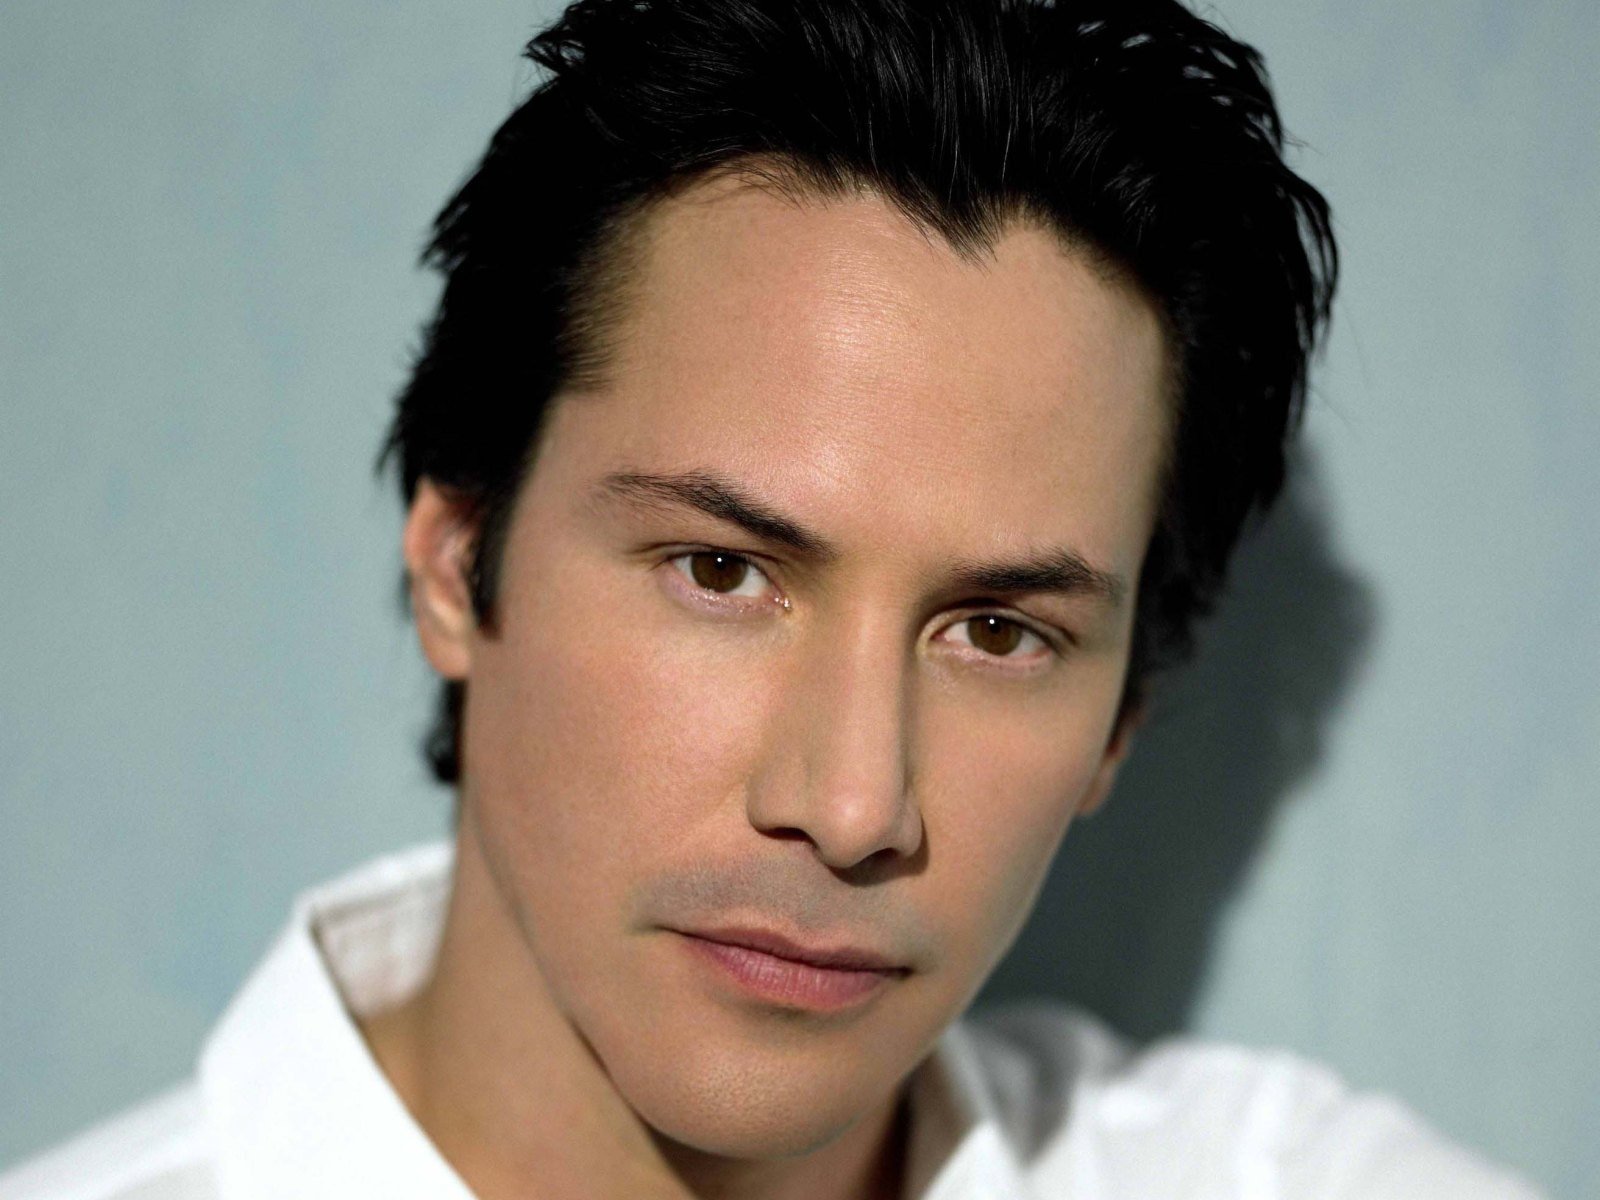 Keanu Reeves Wallpaper and Background Image | 1600x1200 | ID:337313